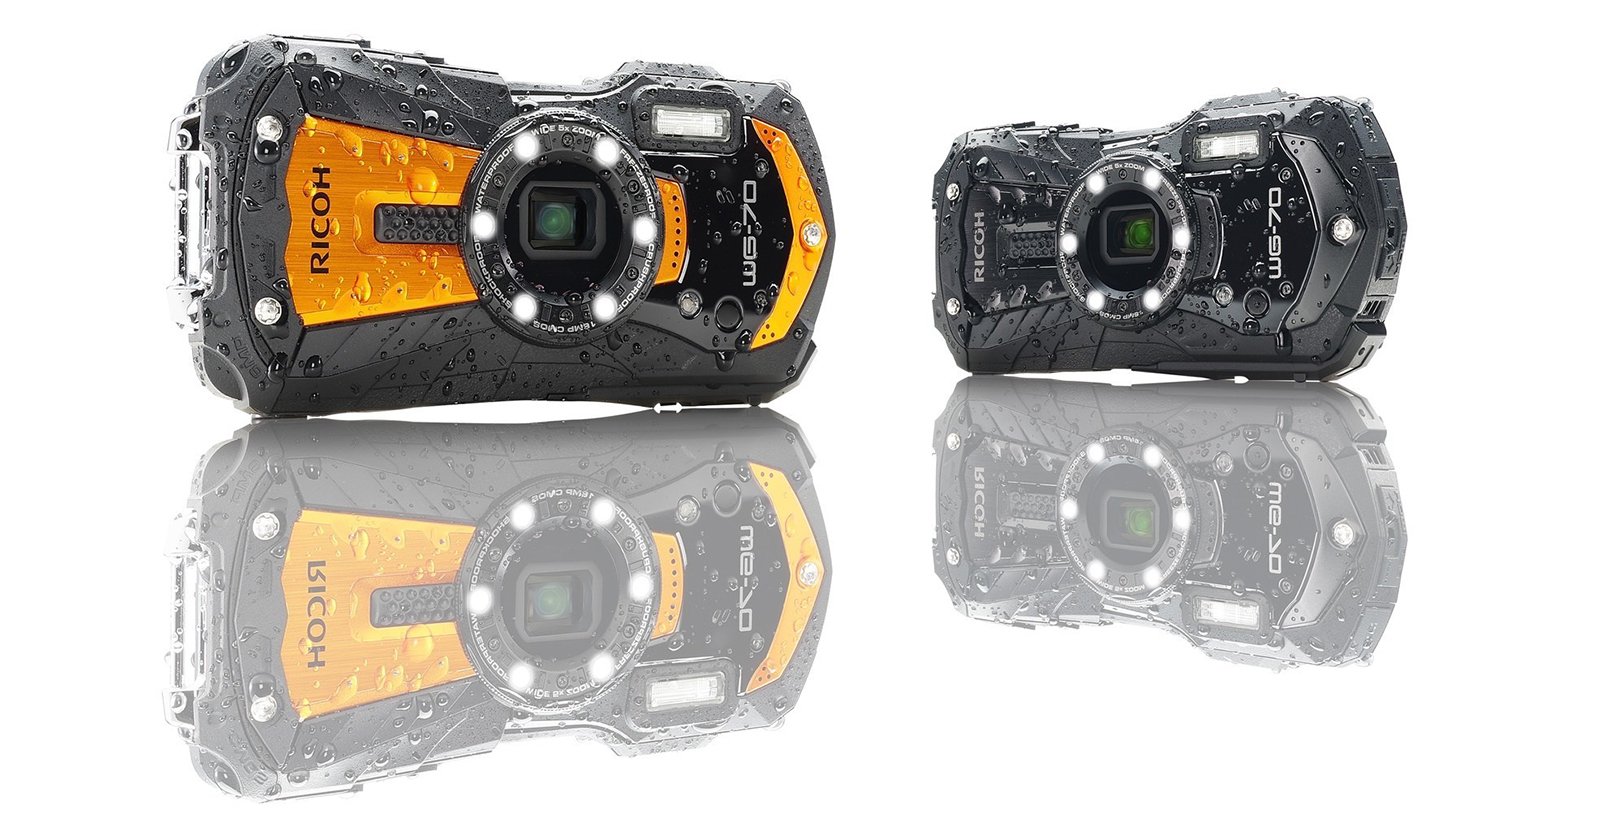 Ricoh Launches the WG-7, a Rugged, Waterproof, 20MP Camera